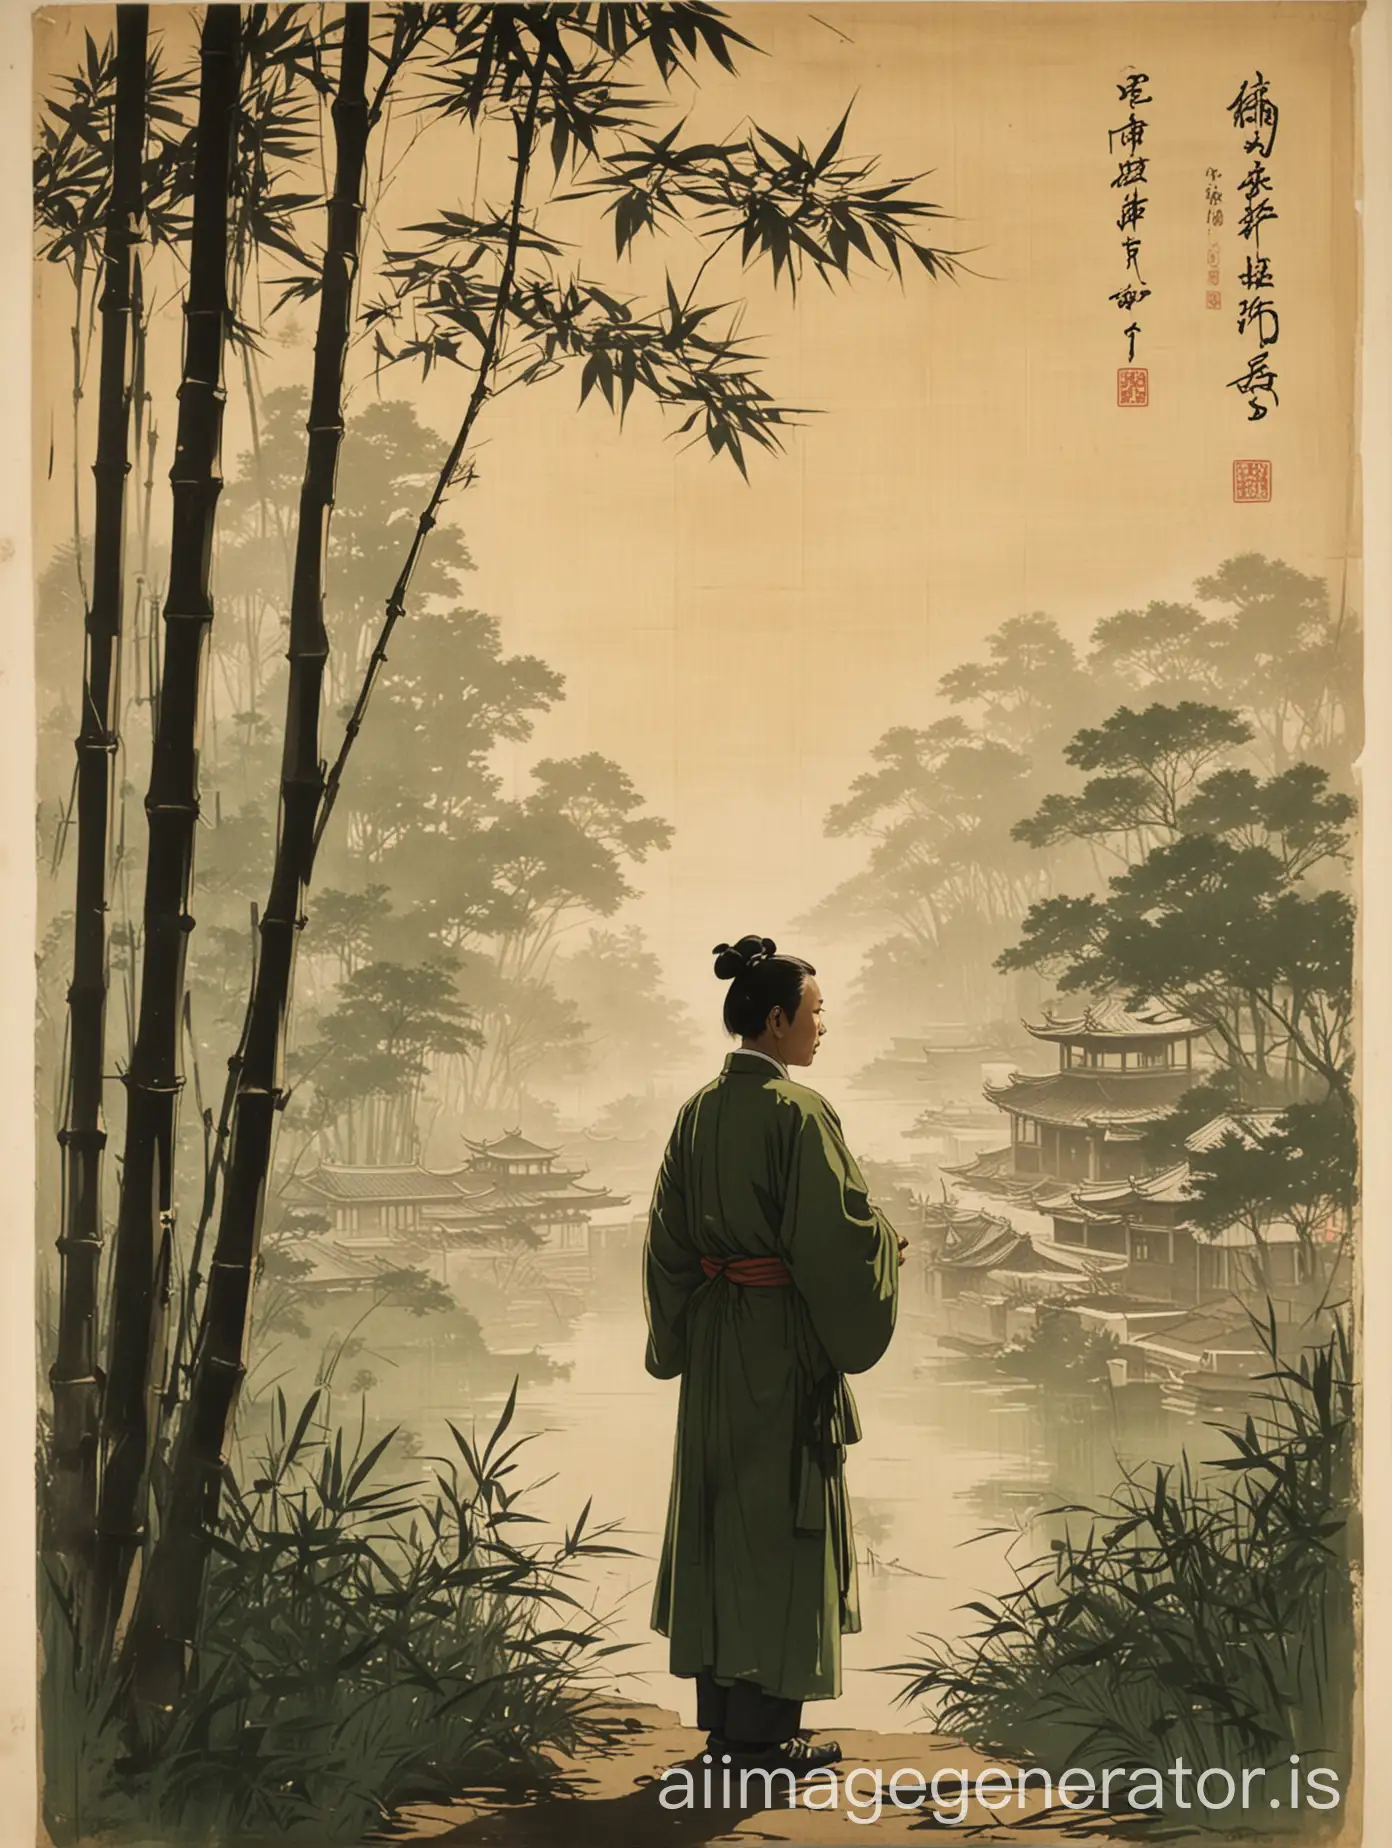 This work takes the theme of ‘clear wind’, symbolizing honesty and uprightness. The central image is the silhouette of an honest official, Ranzhi Fan, from ancient times, with the background being the ancient architecture and green trees of Nanjing University. The official holds a bamboo slip, symbolizing cleanliness and wisdom, while around him flows a green line representing clear wind, implying that the spirit of integrity is flowing in the campus. By combining cultural and historical elements of the campus, the work hopes to convey the idea of ‘clear wind and righteousness, honesty as the foundation’, inspiring students to uphold honest and upright character in their daily learning and life.